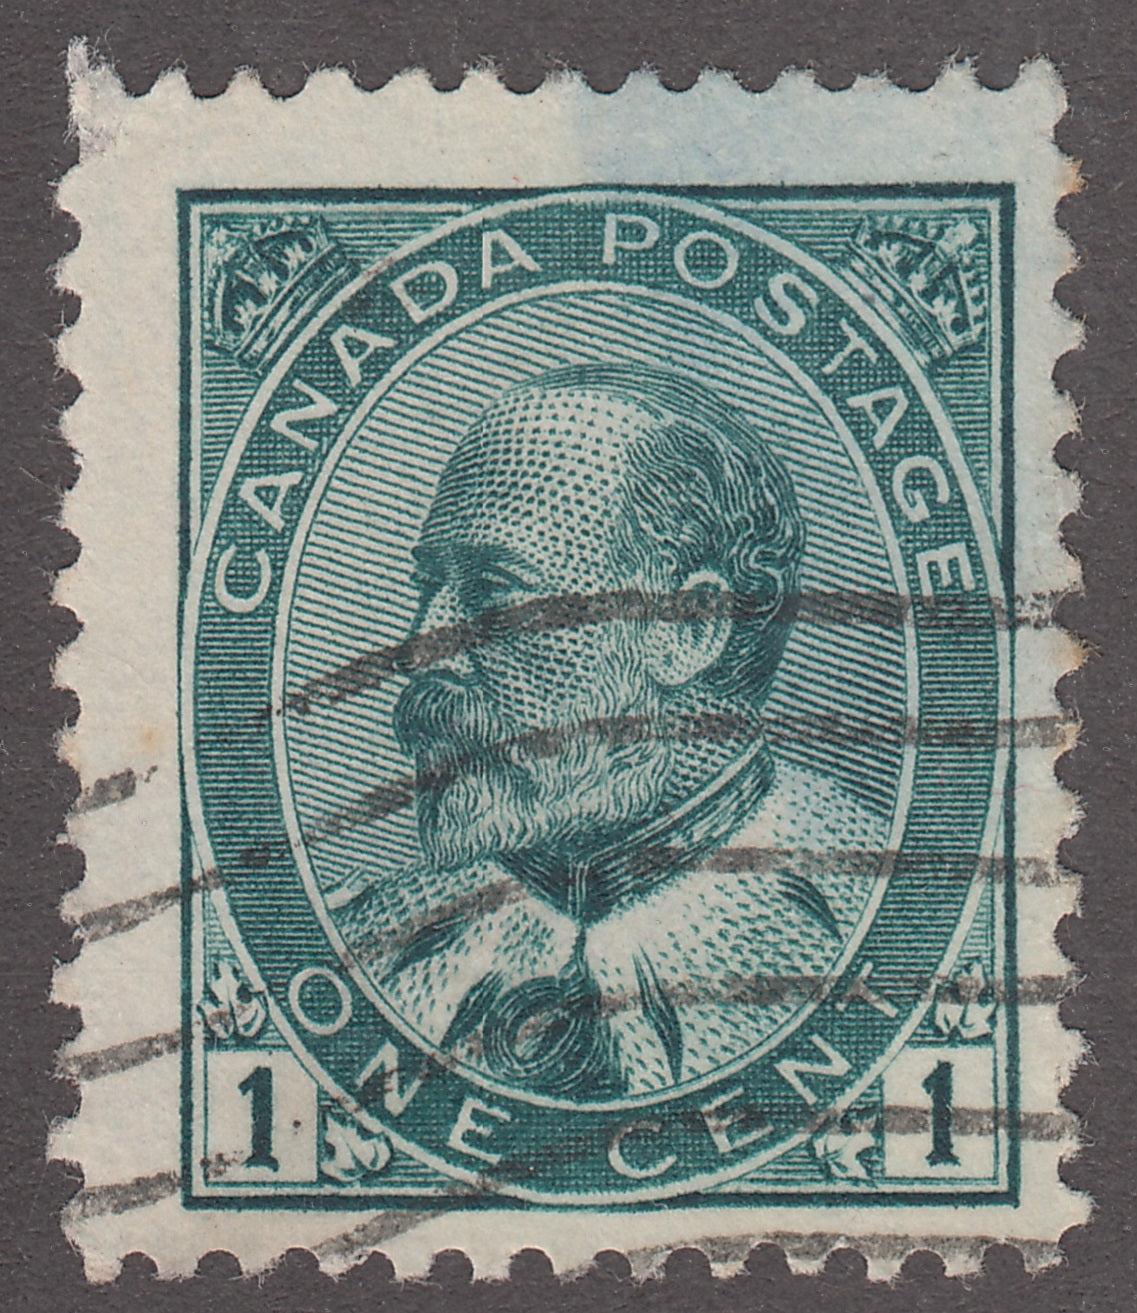 0089CA2101 - Canada #89 - Used, Re-entry